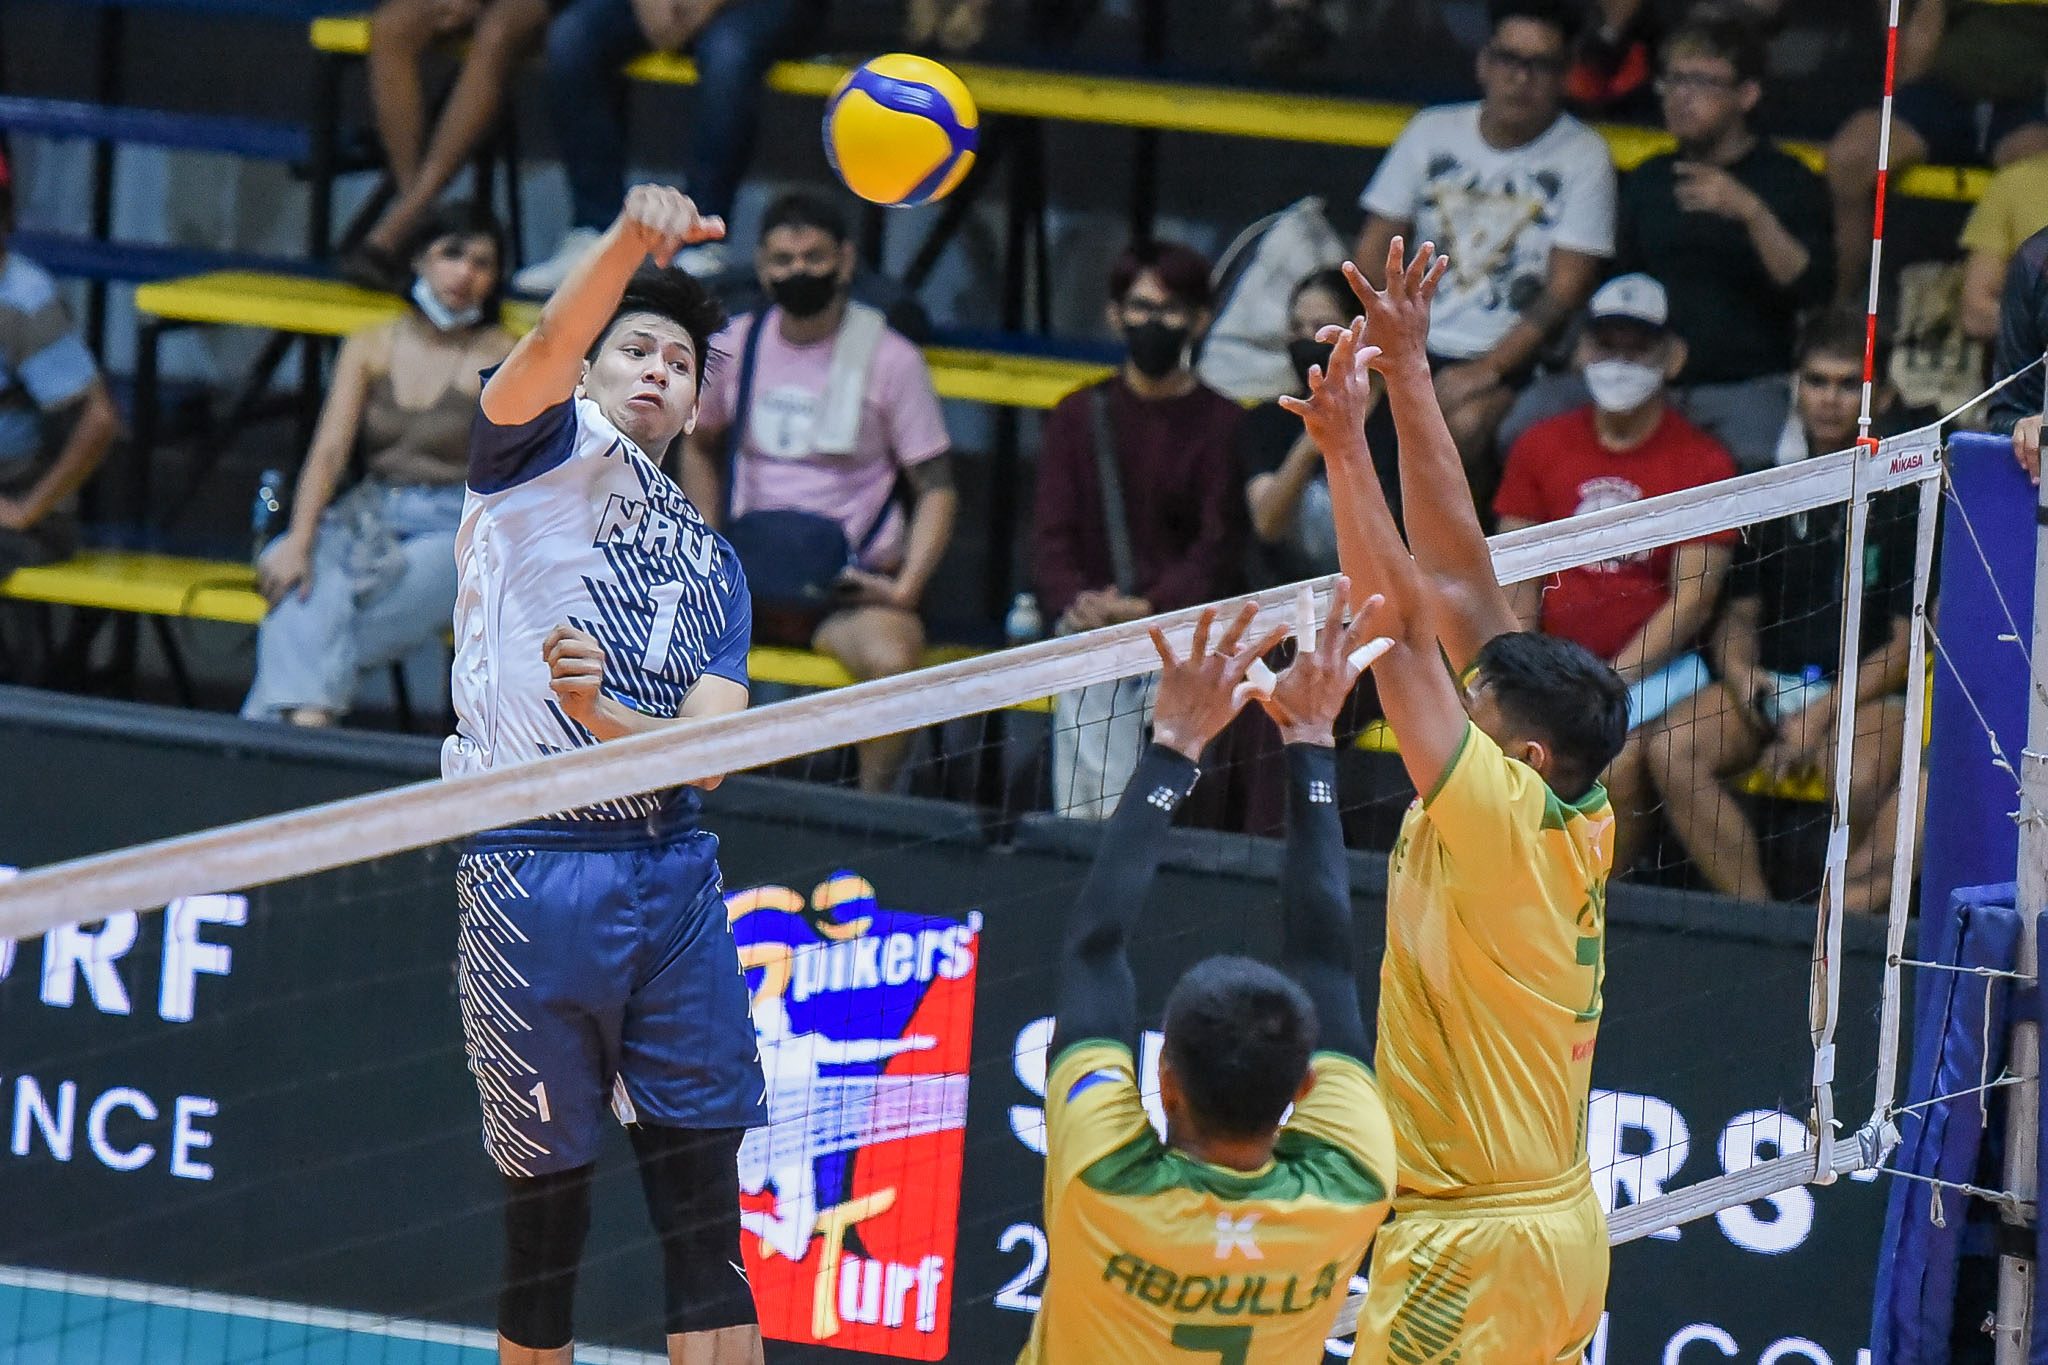 Umandal, Casana carry Navy over Army; Cignal sweeps VNS to stay unbeaten